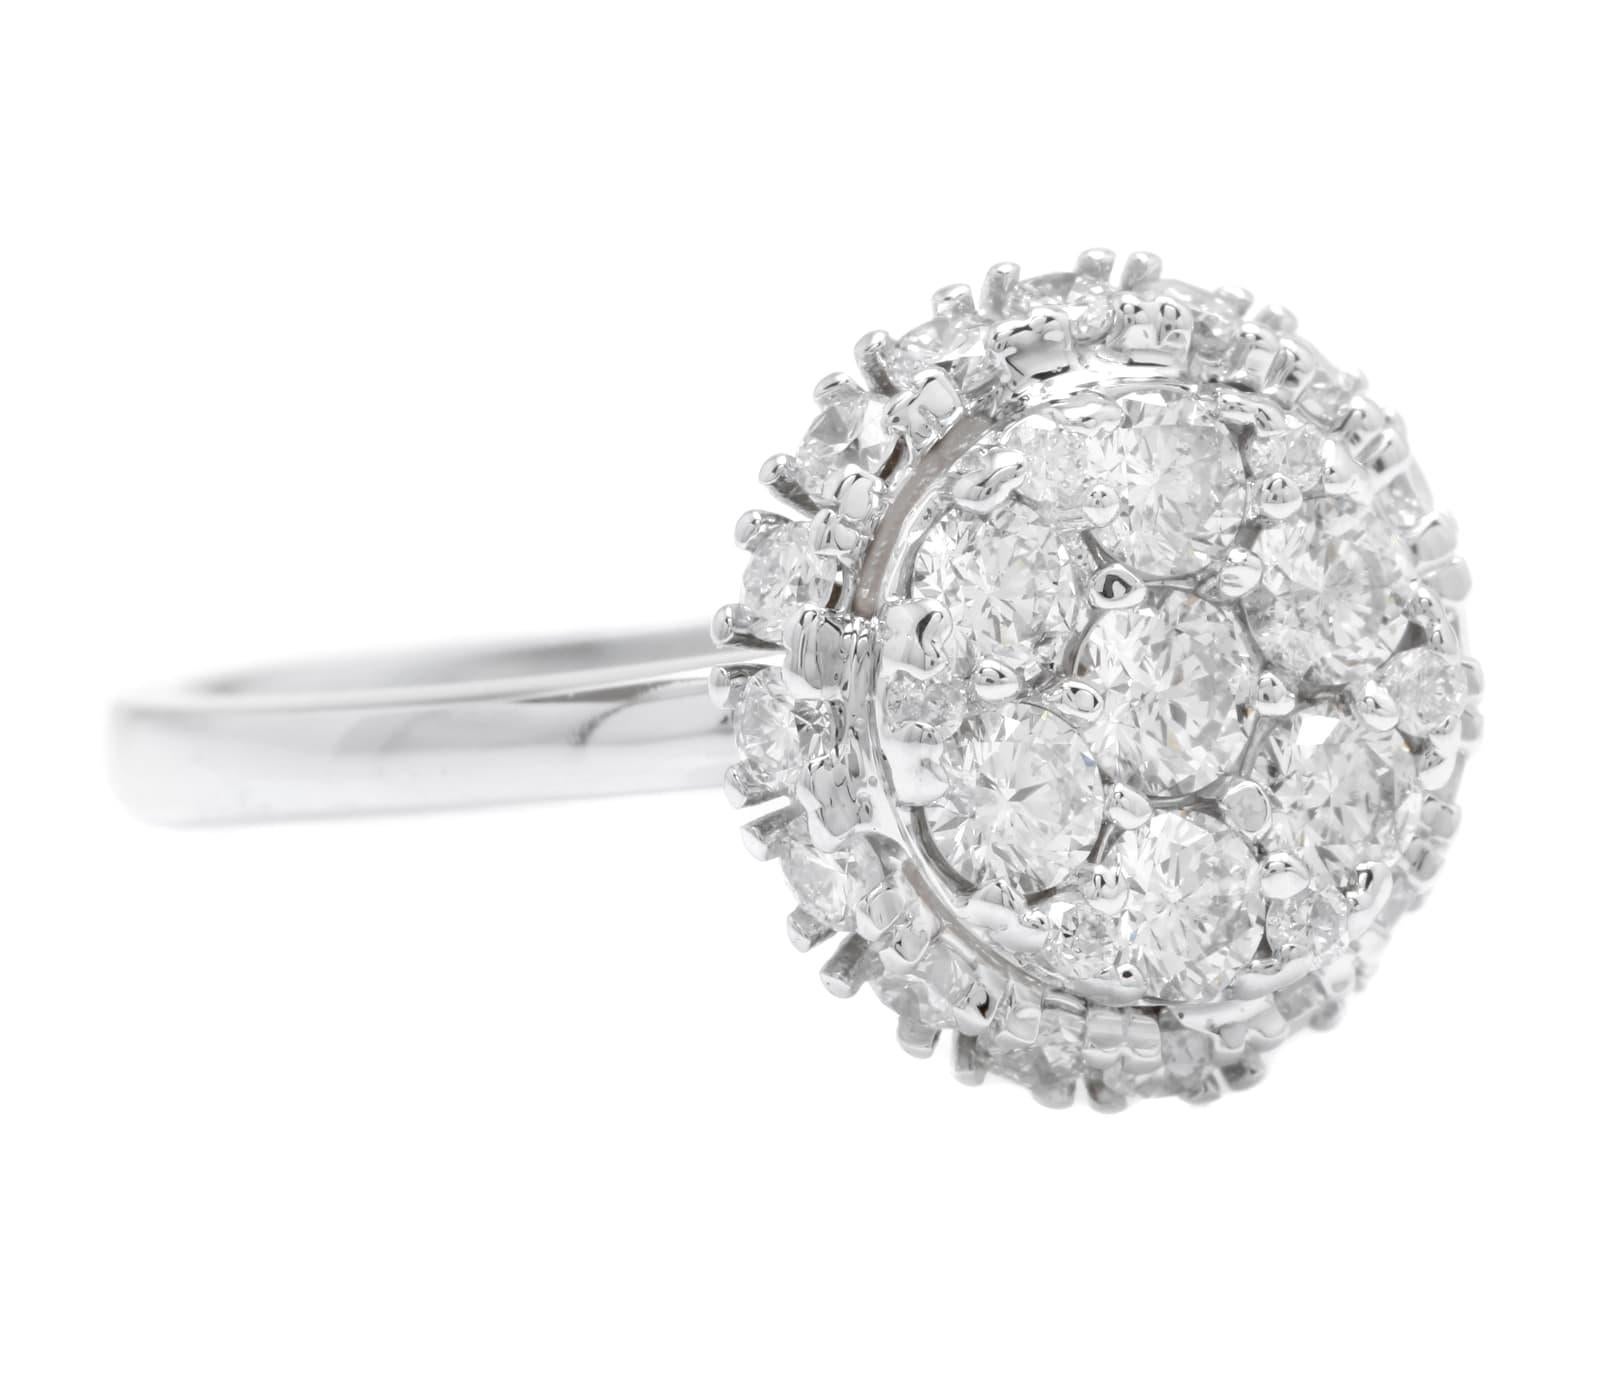 Splendid 1.15 Carats Natural Diamond 14K Solid White Gold Ring

Suggested Replacement Value: $4,000.00

Stamped: (14K)

Total Natural Round Cut Diamonds Weight: 1.15 Carats (color G-H / Clarity SI1-SI2)

The width of the ring is: 12.20mm

Ring size: